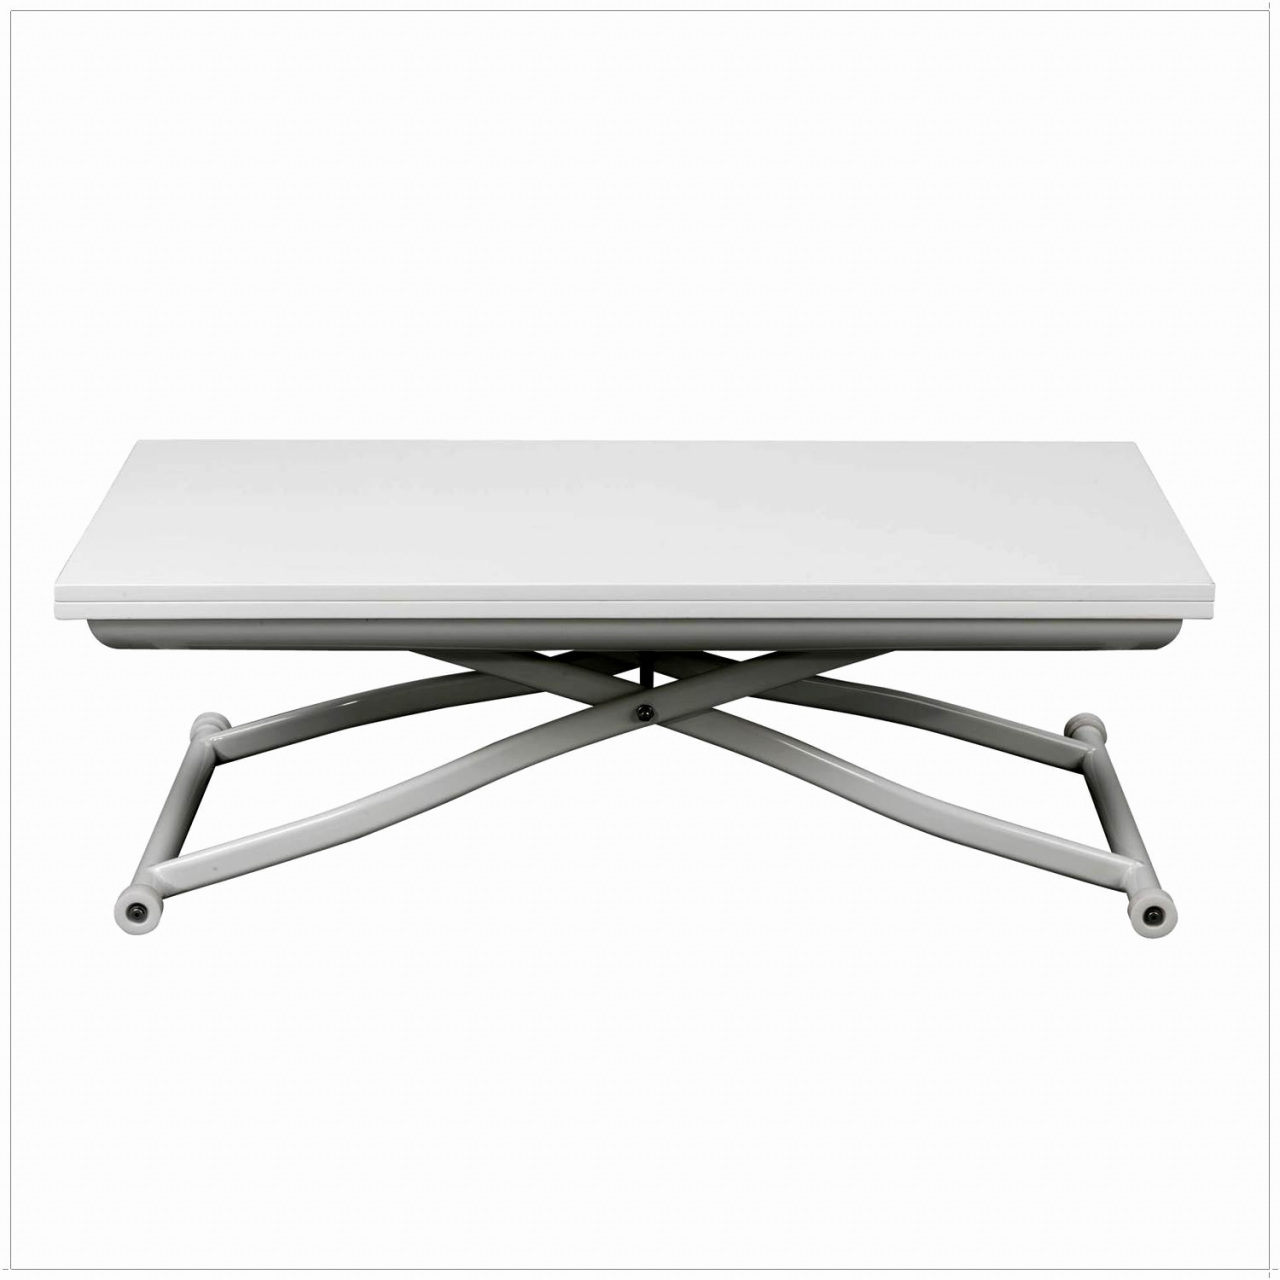 Table basse relevable depliable conforama